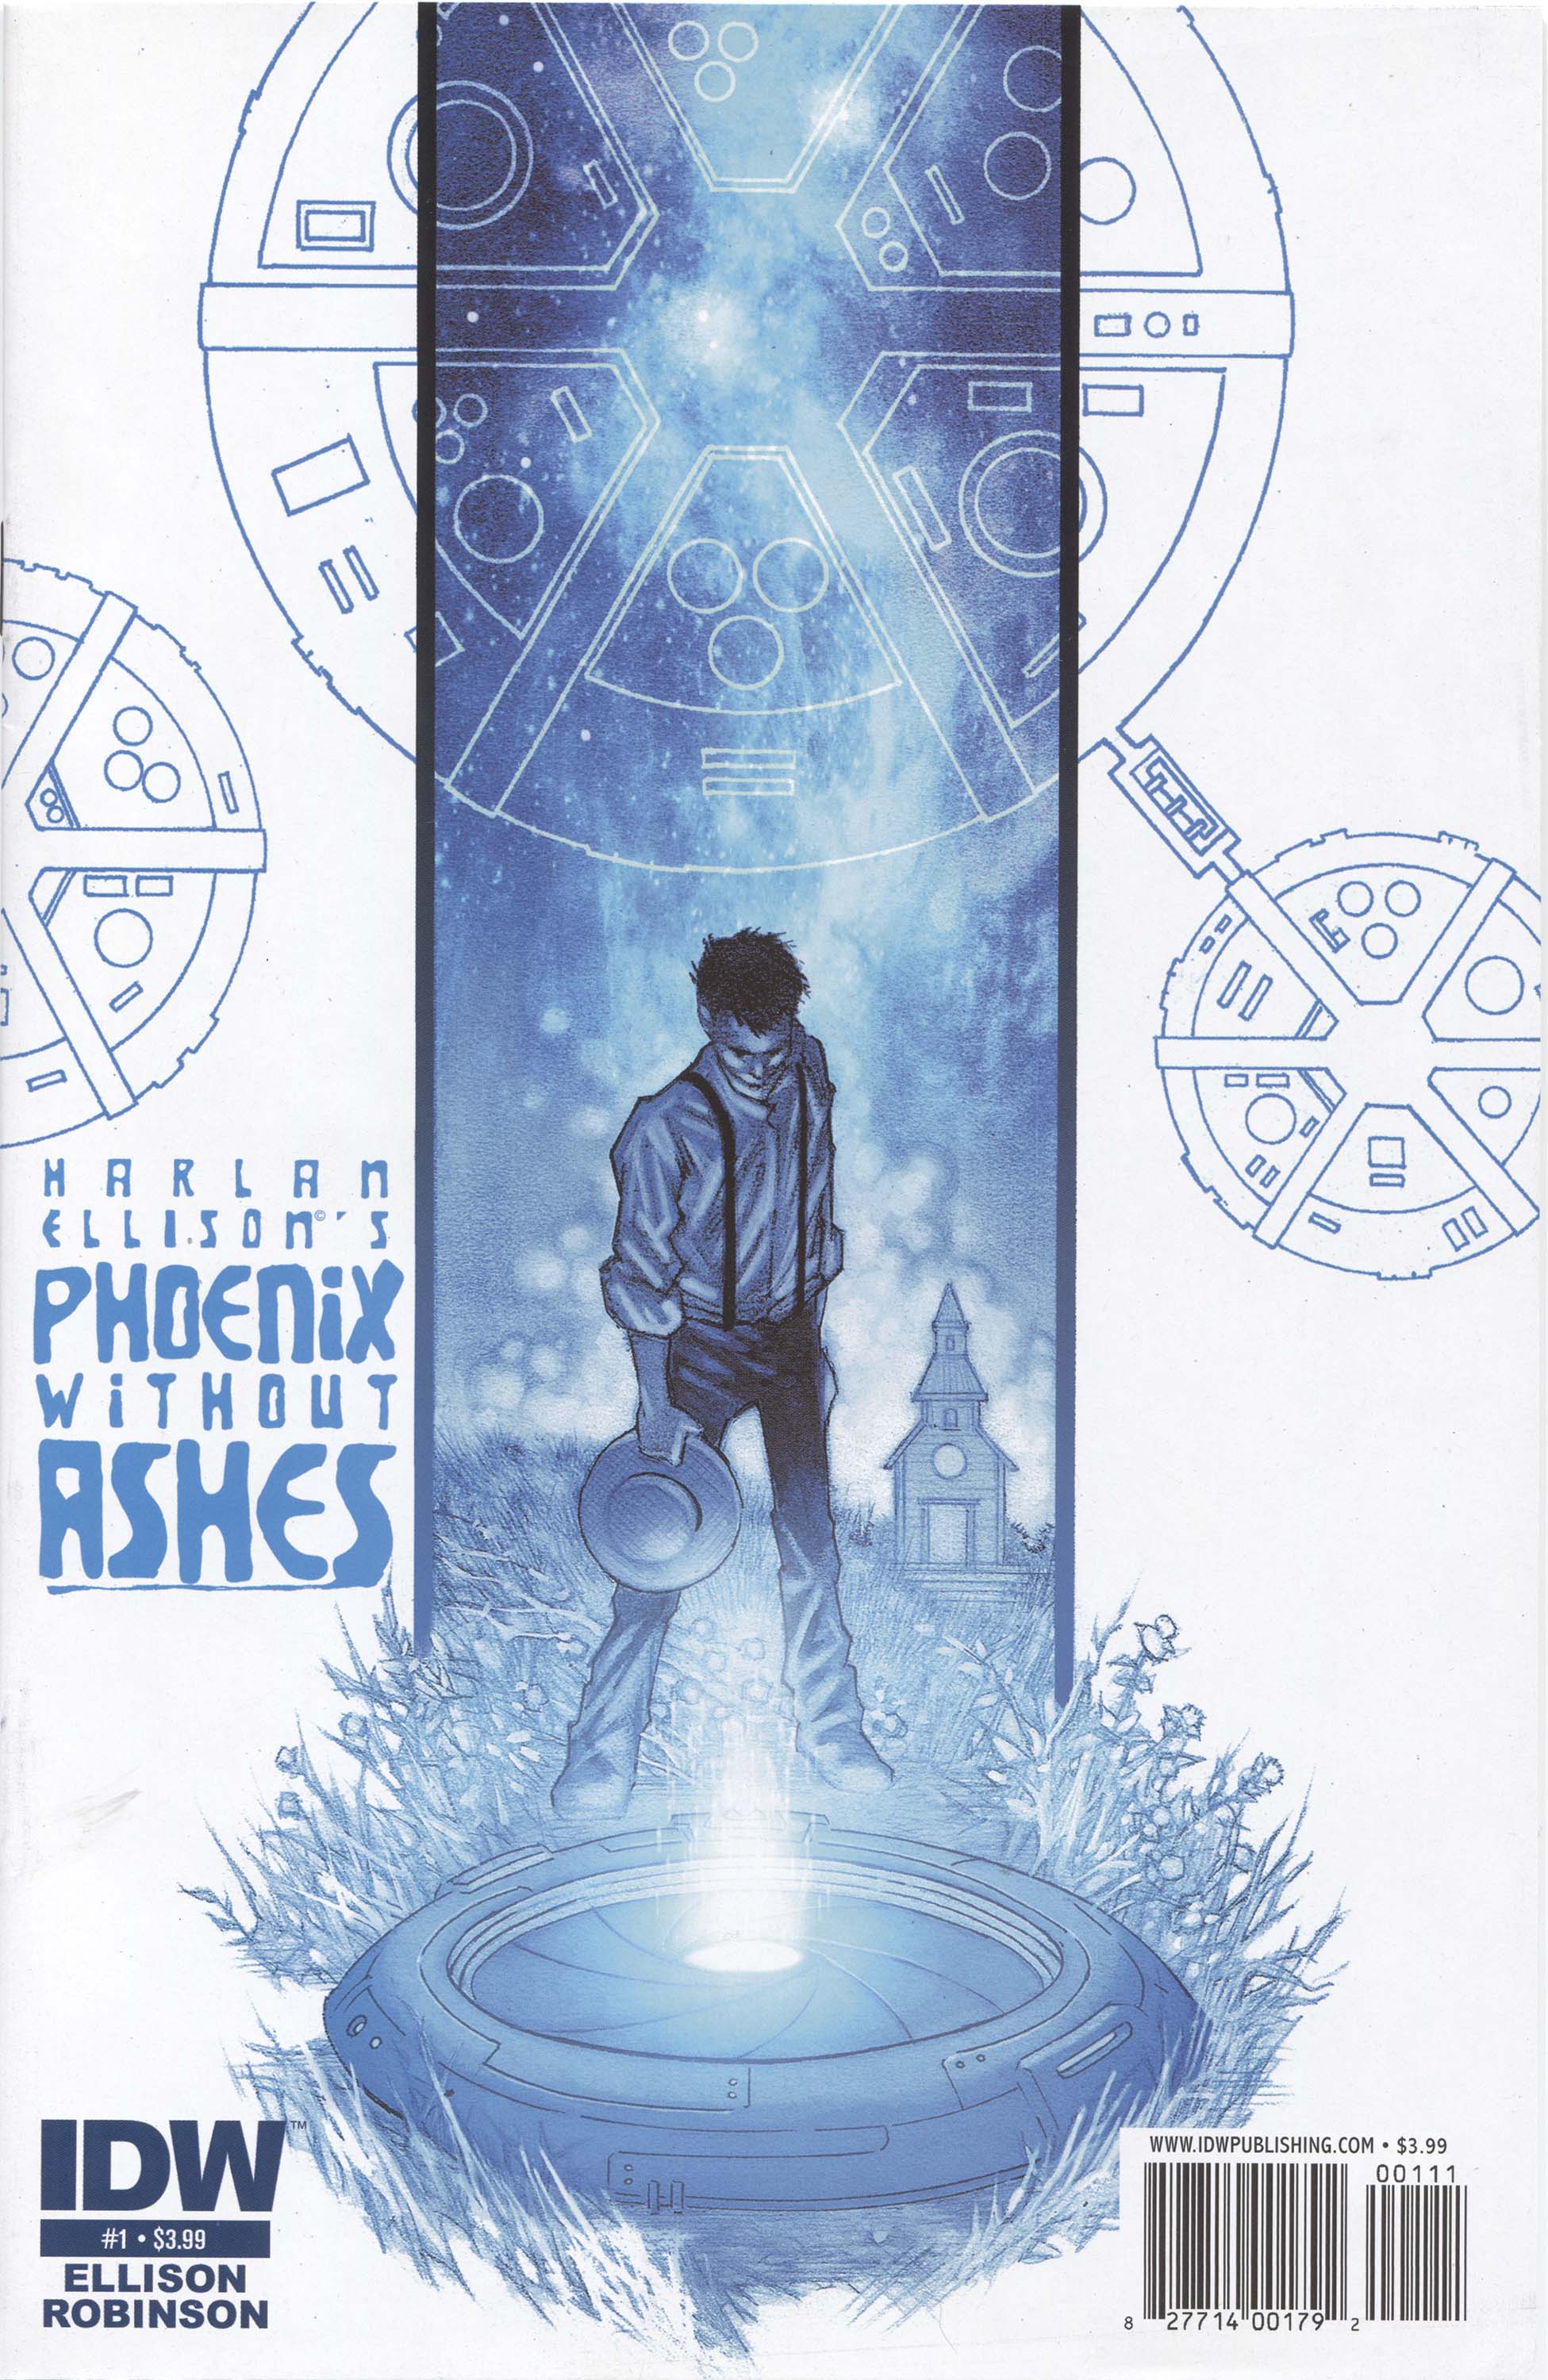 Phoenix Without Ashes #1, cover, art by John K. Snyder, III